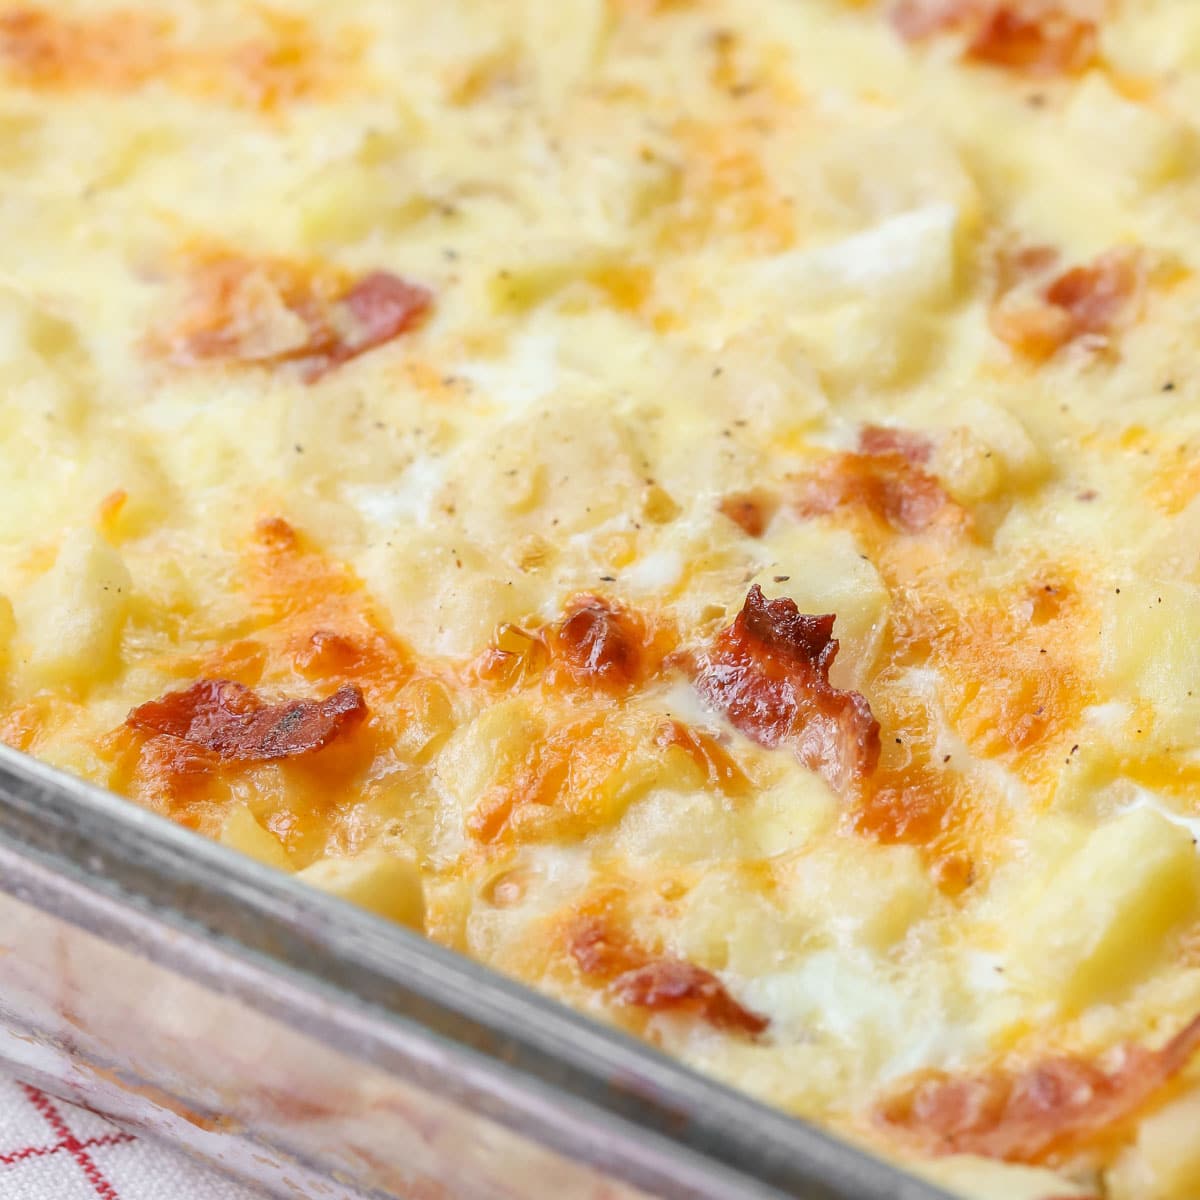 Thanksgiving breakfast ideas - a close up of cheesy breakfast casserole baked in a glass dish.